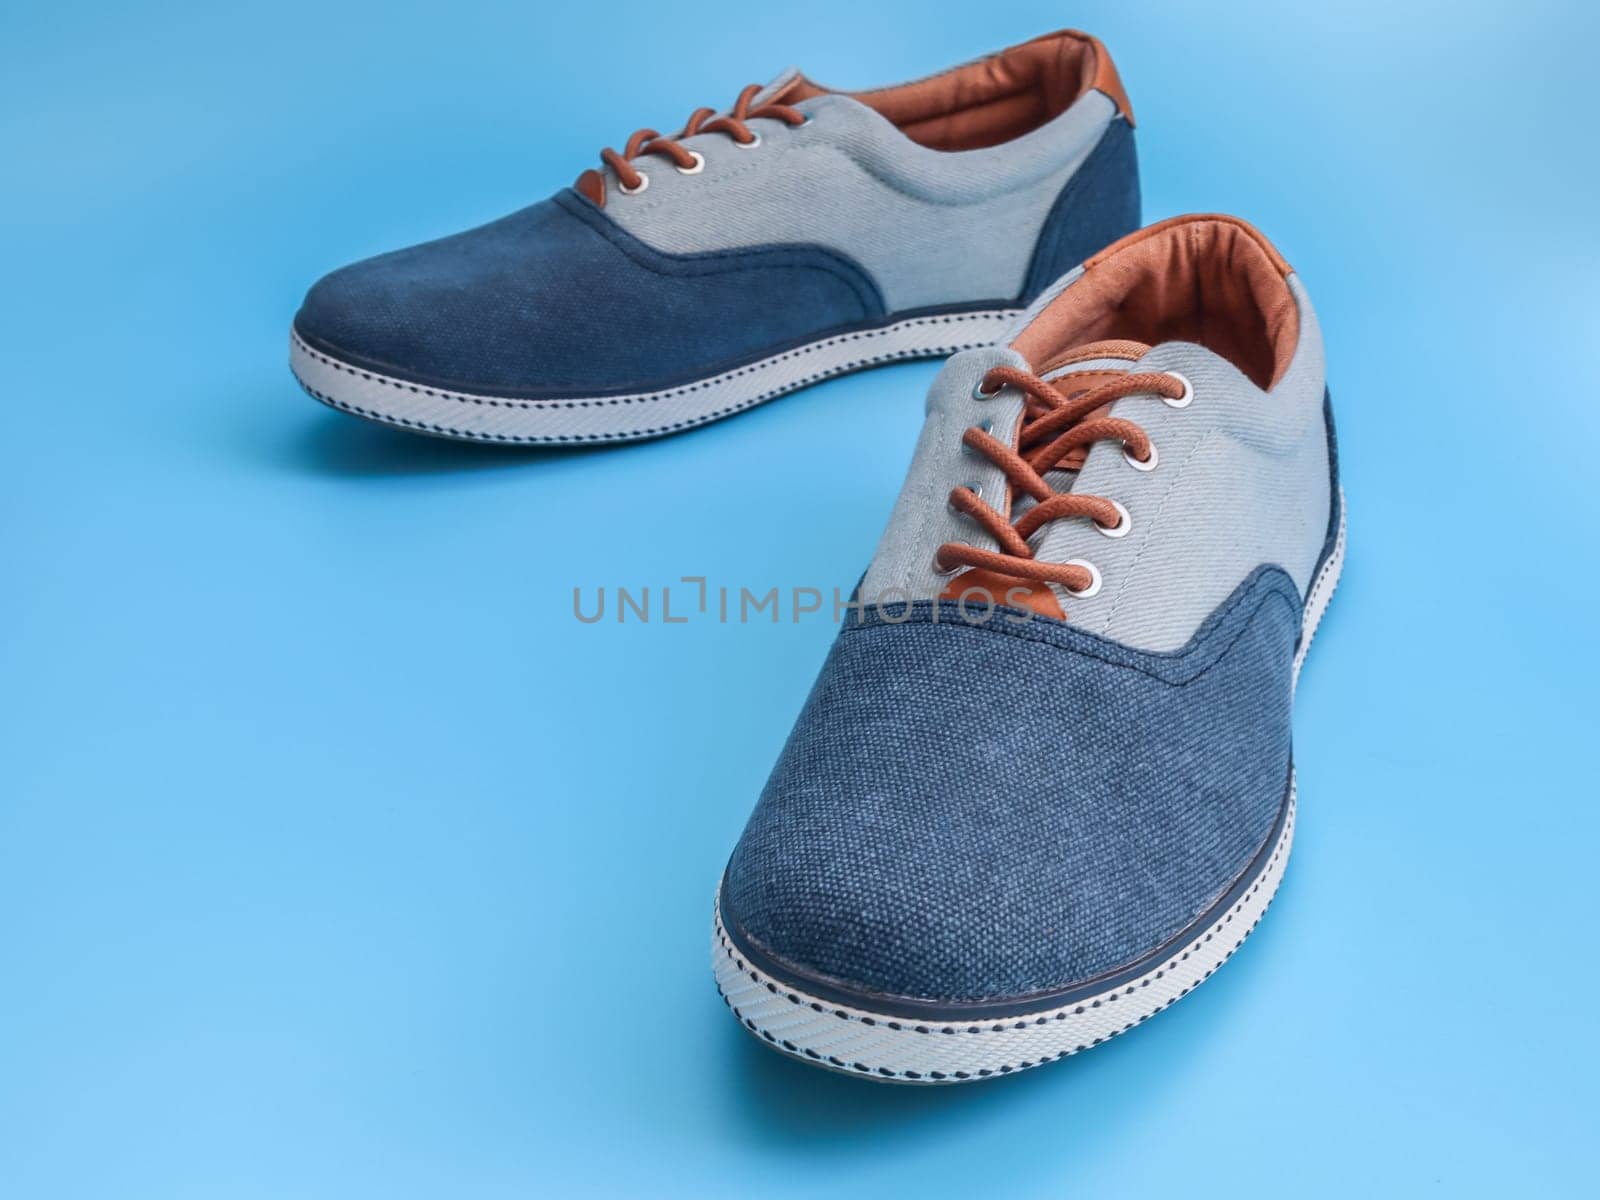 One pair of denim sneakers lies in the center on a blue background, close-up side view. The concept of fashion, beauty, man shoes.